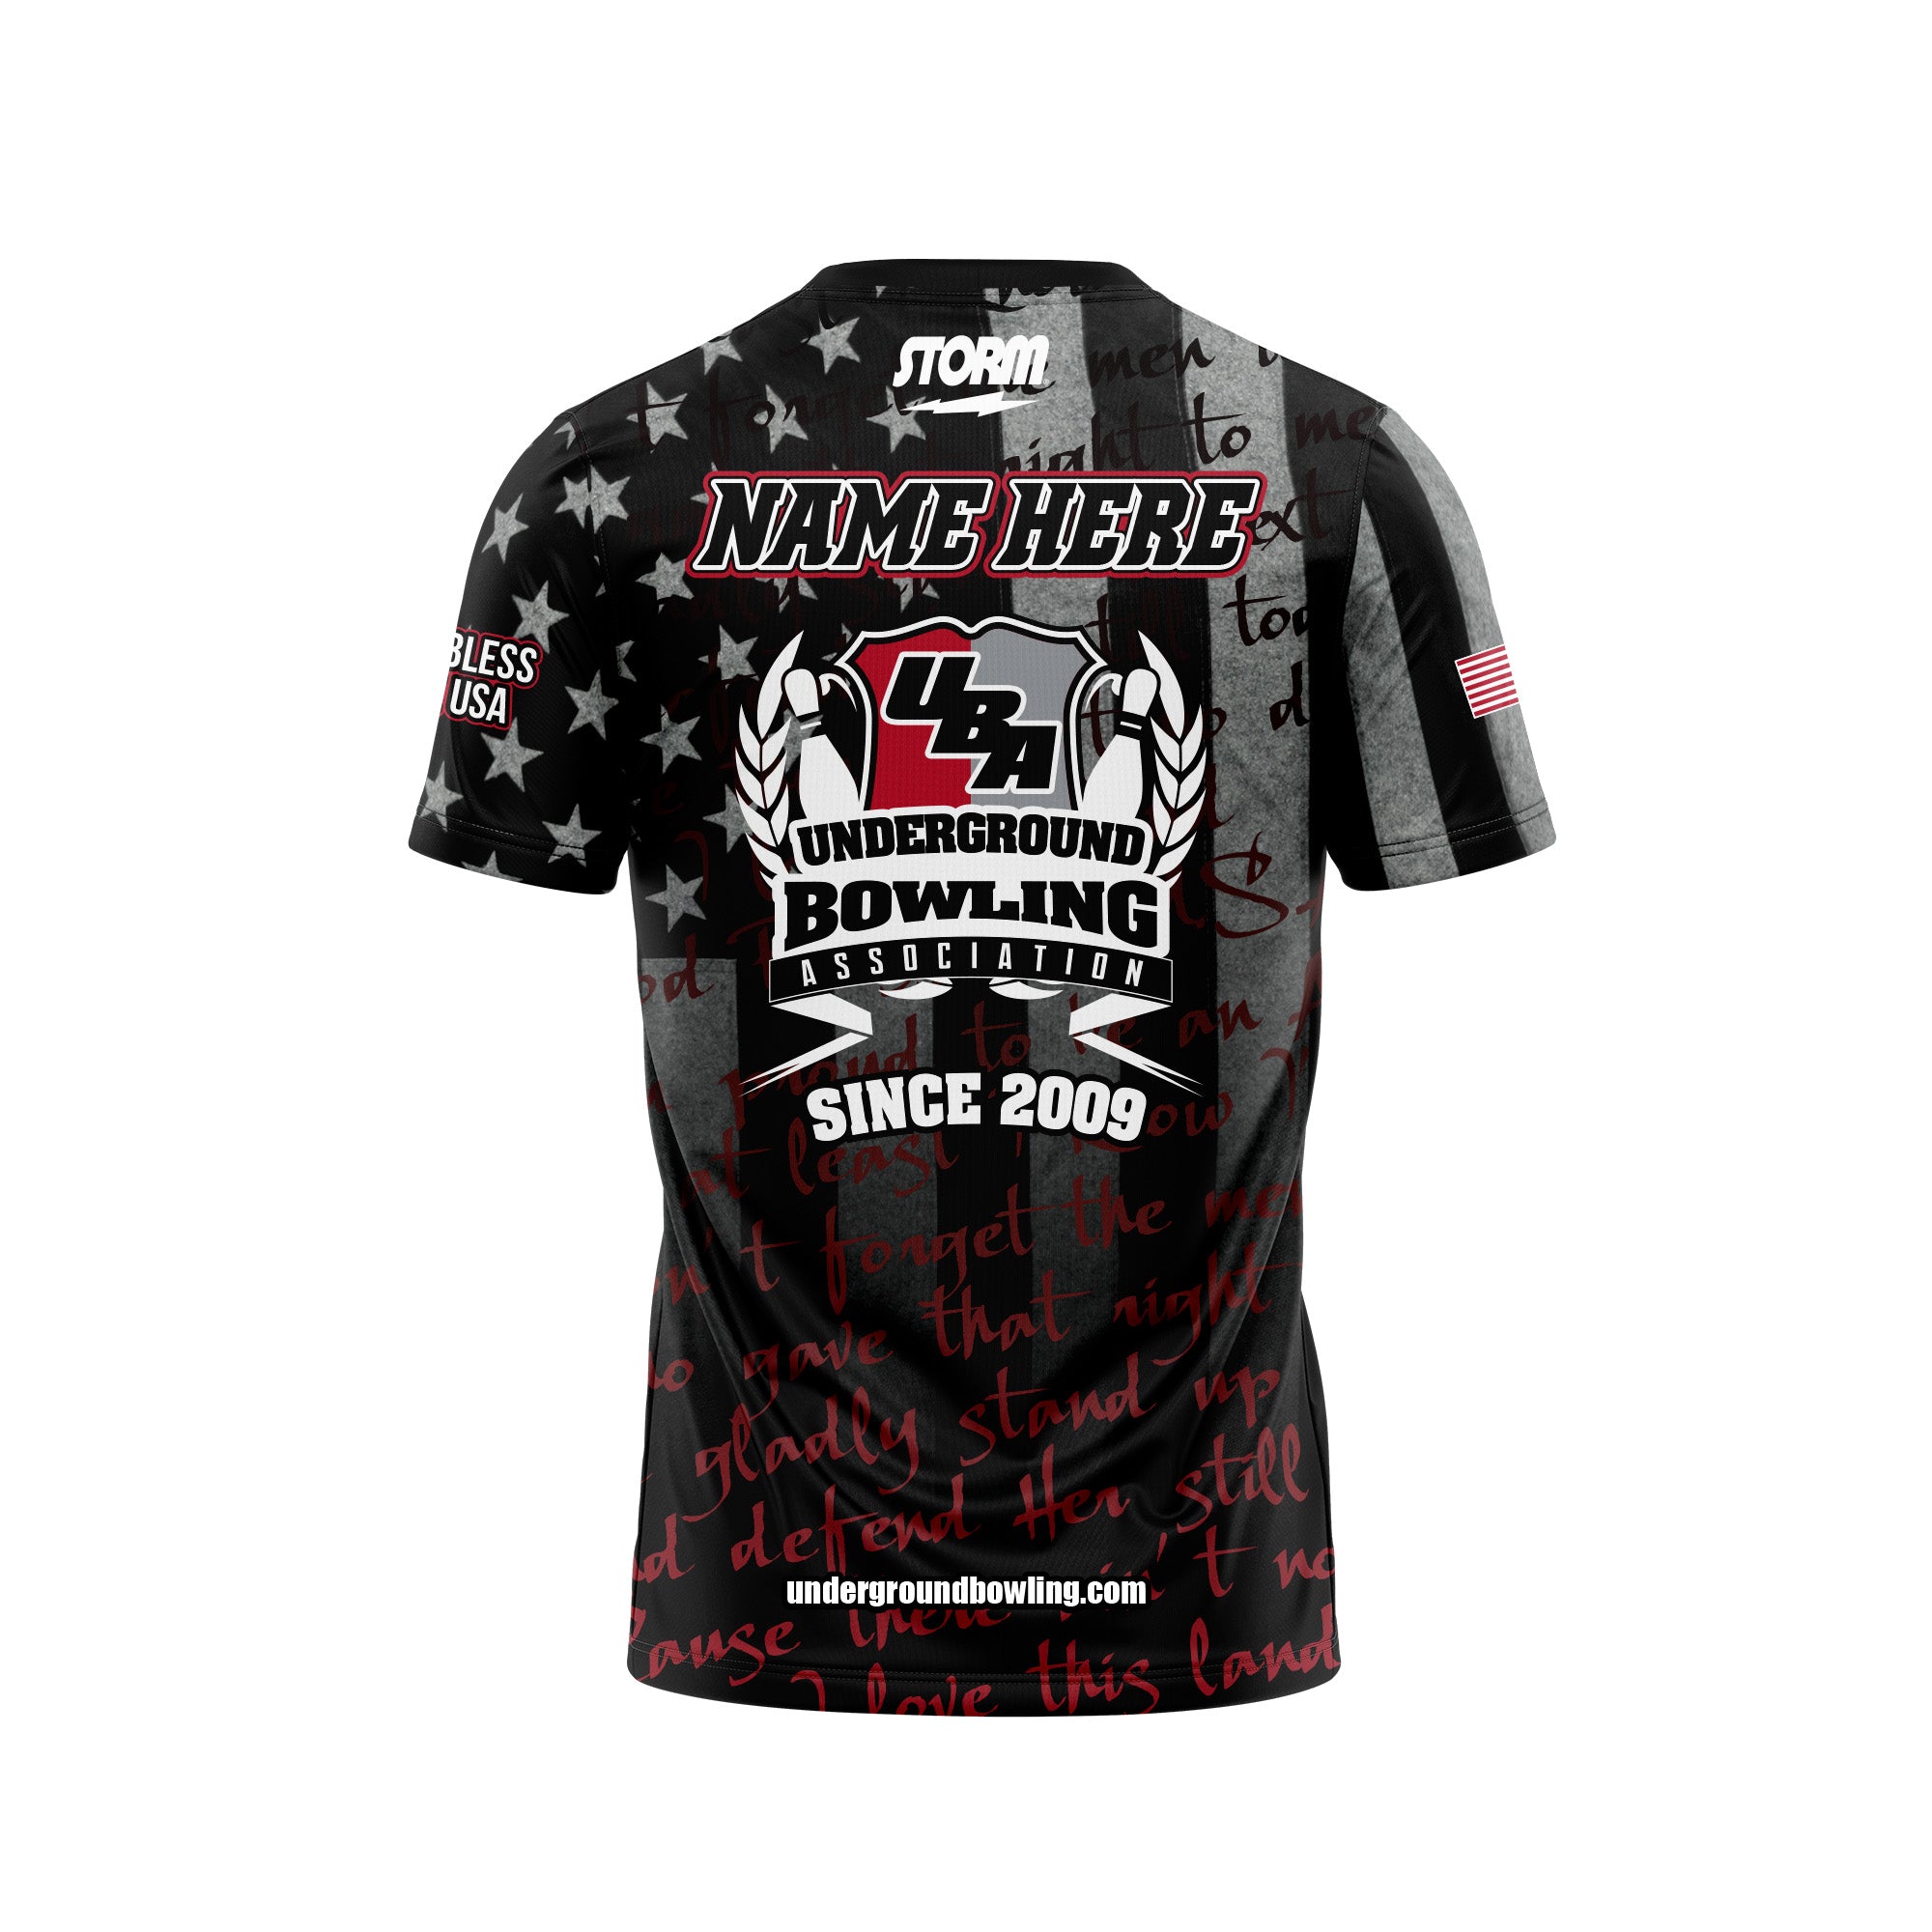 Striking Vipers Bnw Flag Jersey